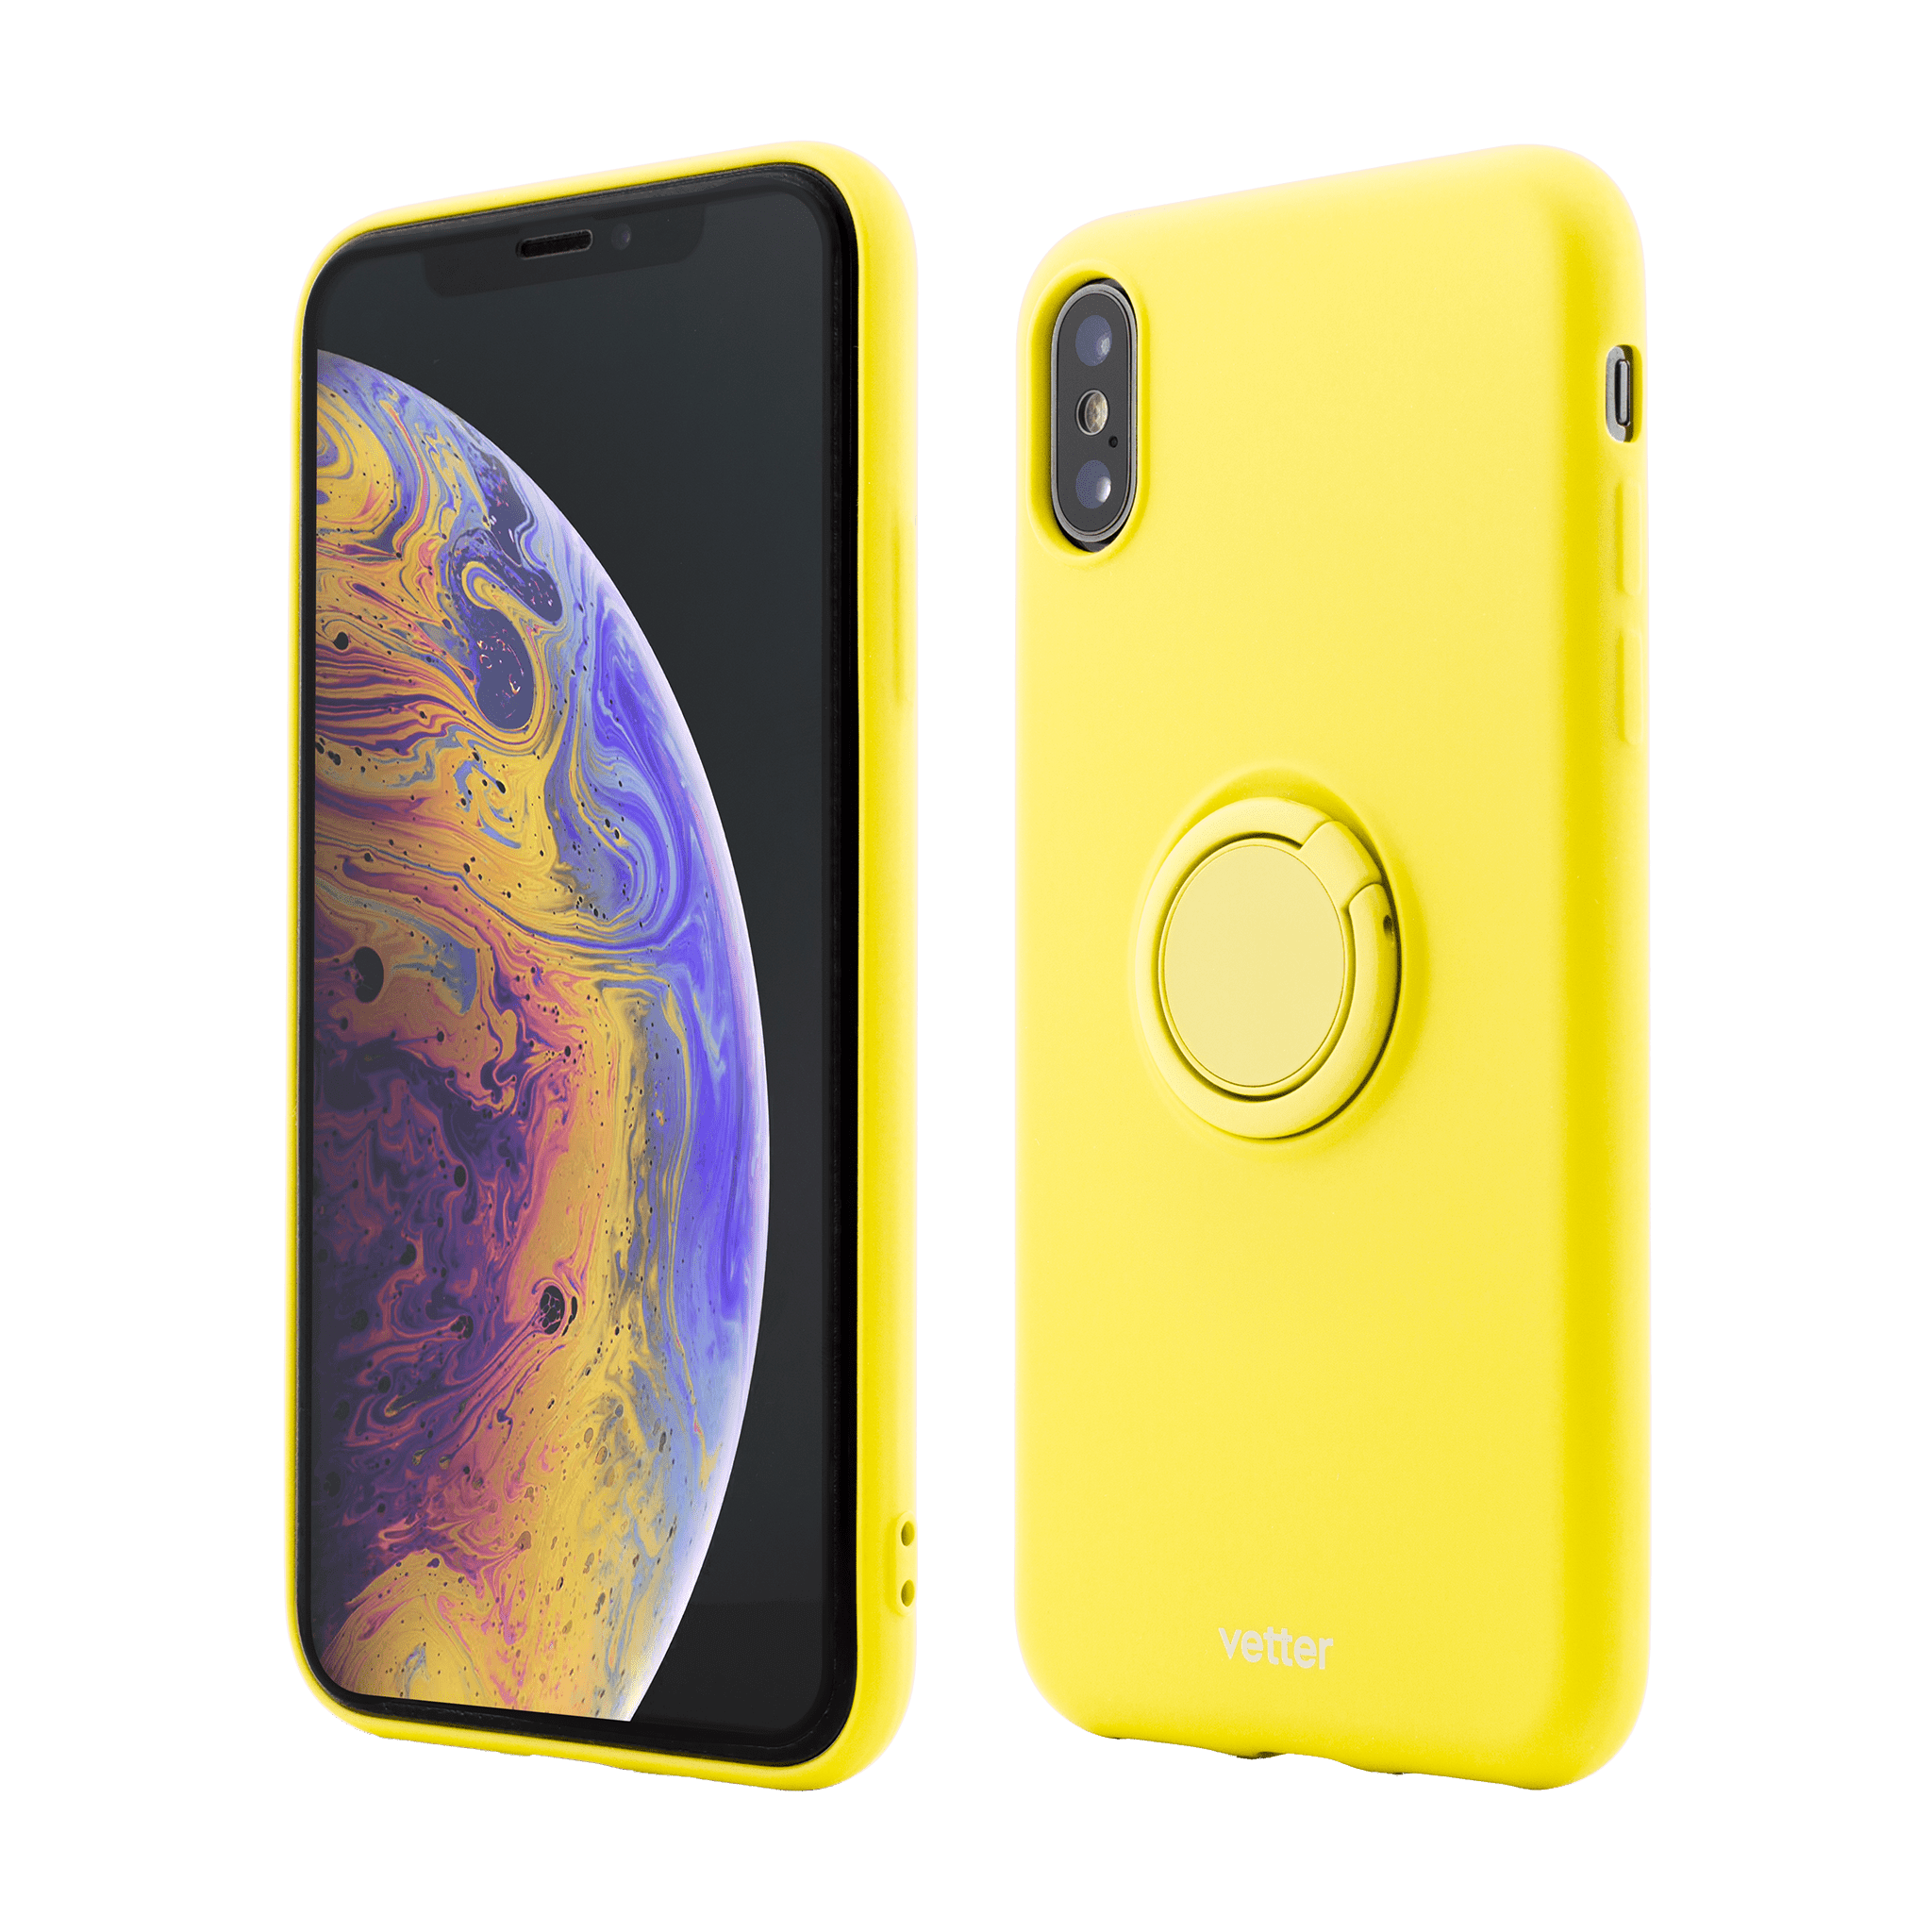 Husa Vetter pentru iPhone XS Max, Soft Pro with Magnetic iStand, Galben - vetter.ro